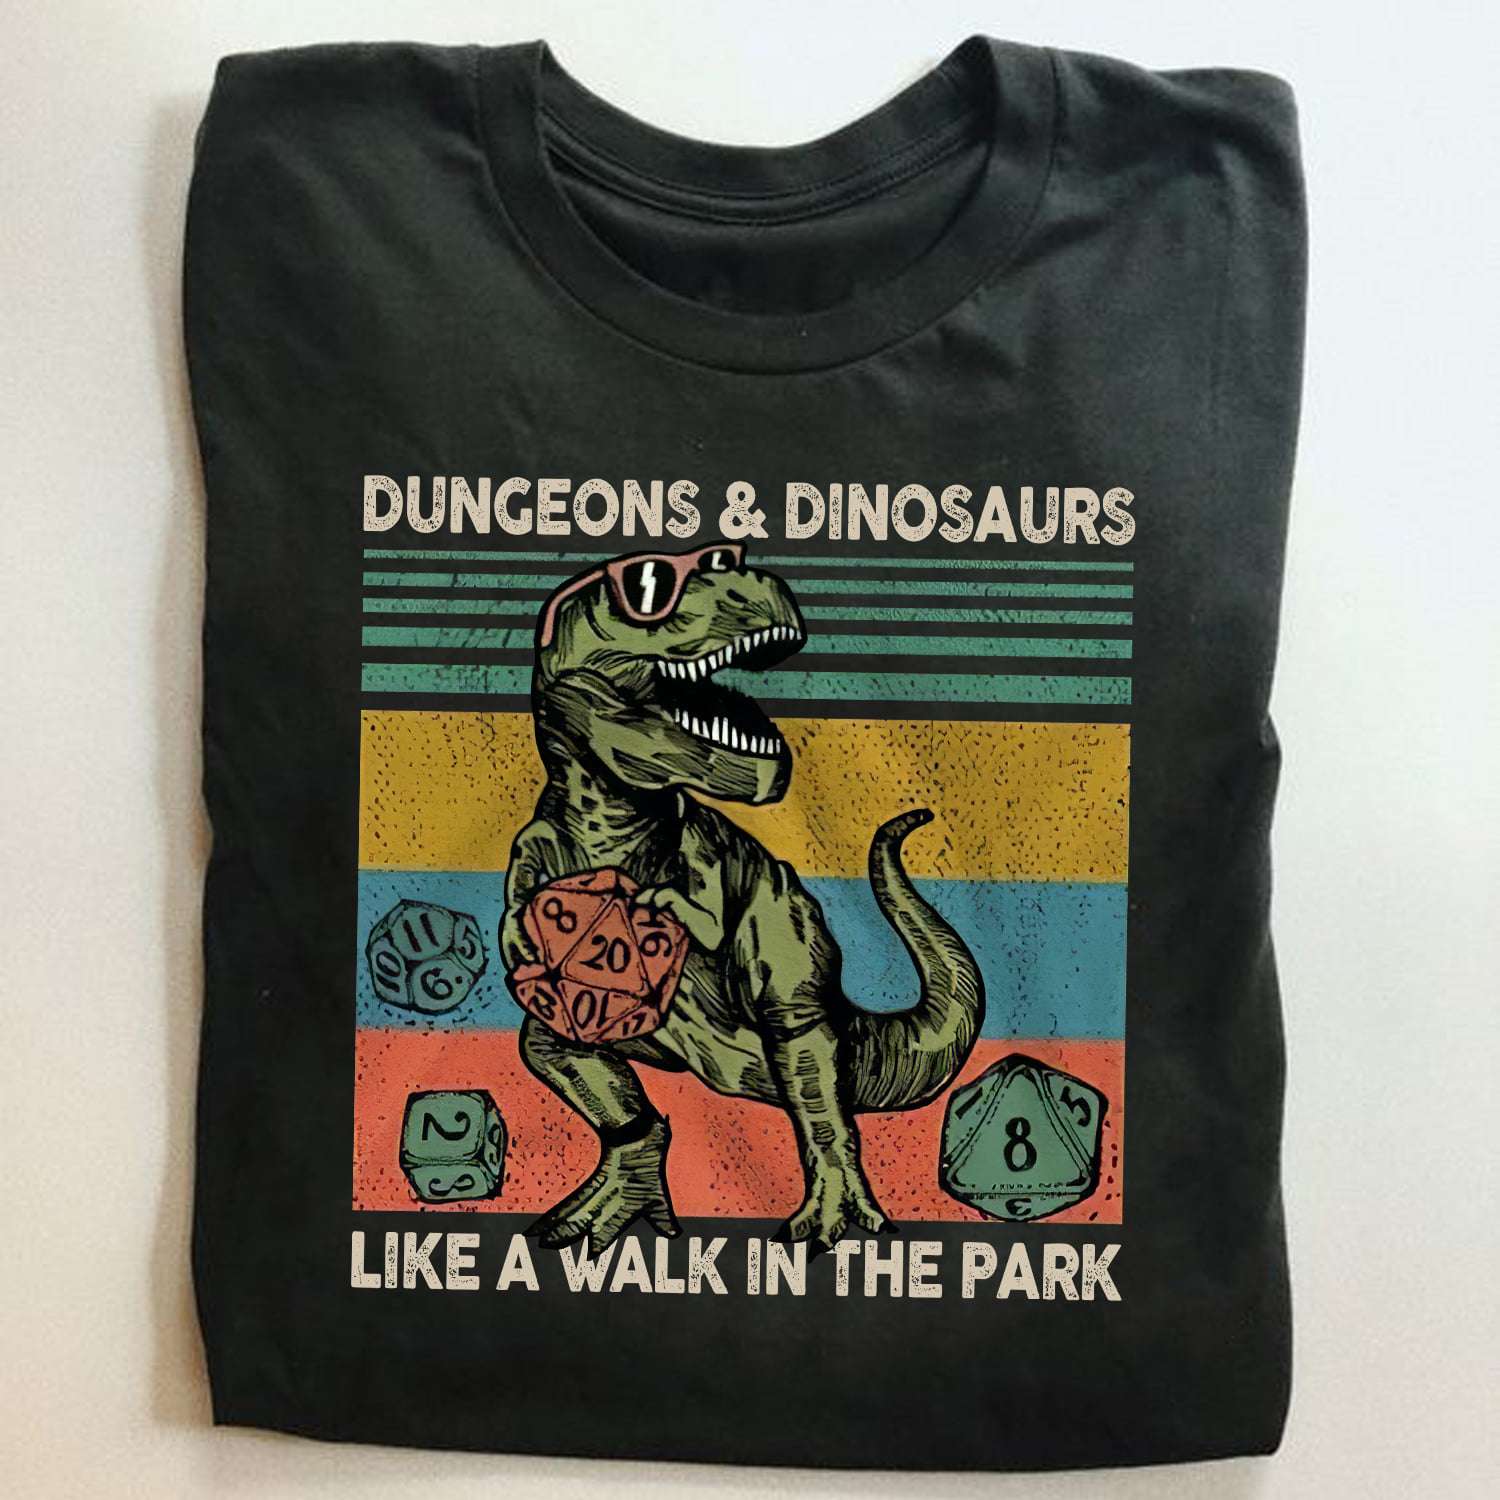 Dinosaurs D&D Game - Dungeons And Dinosaurs like a walk in the park